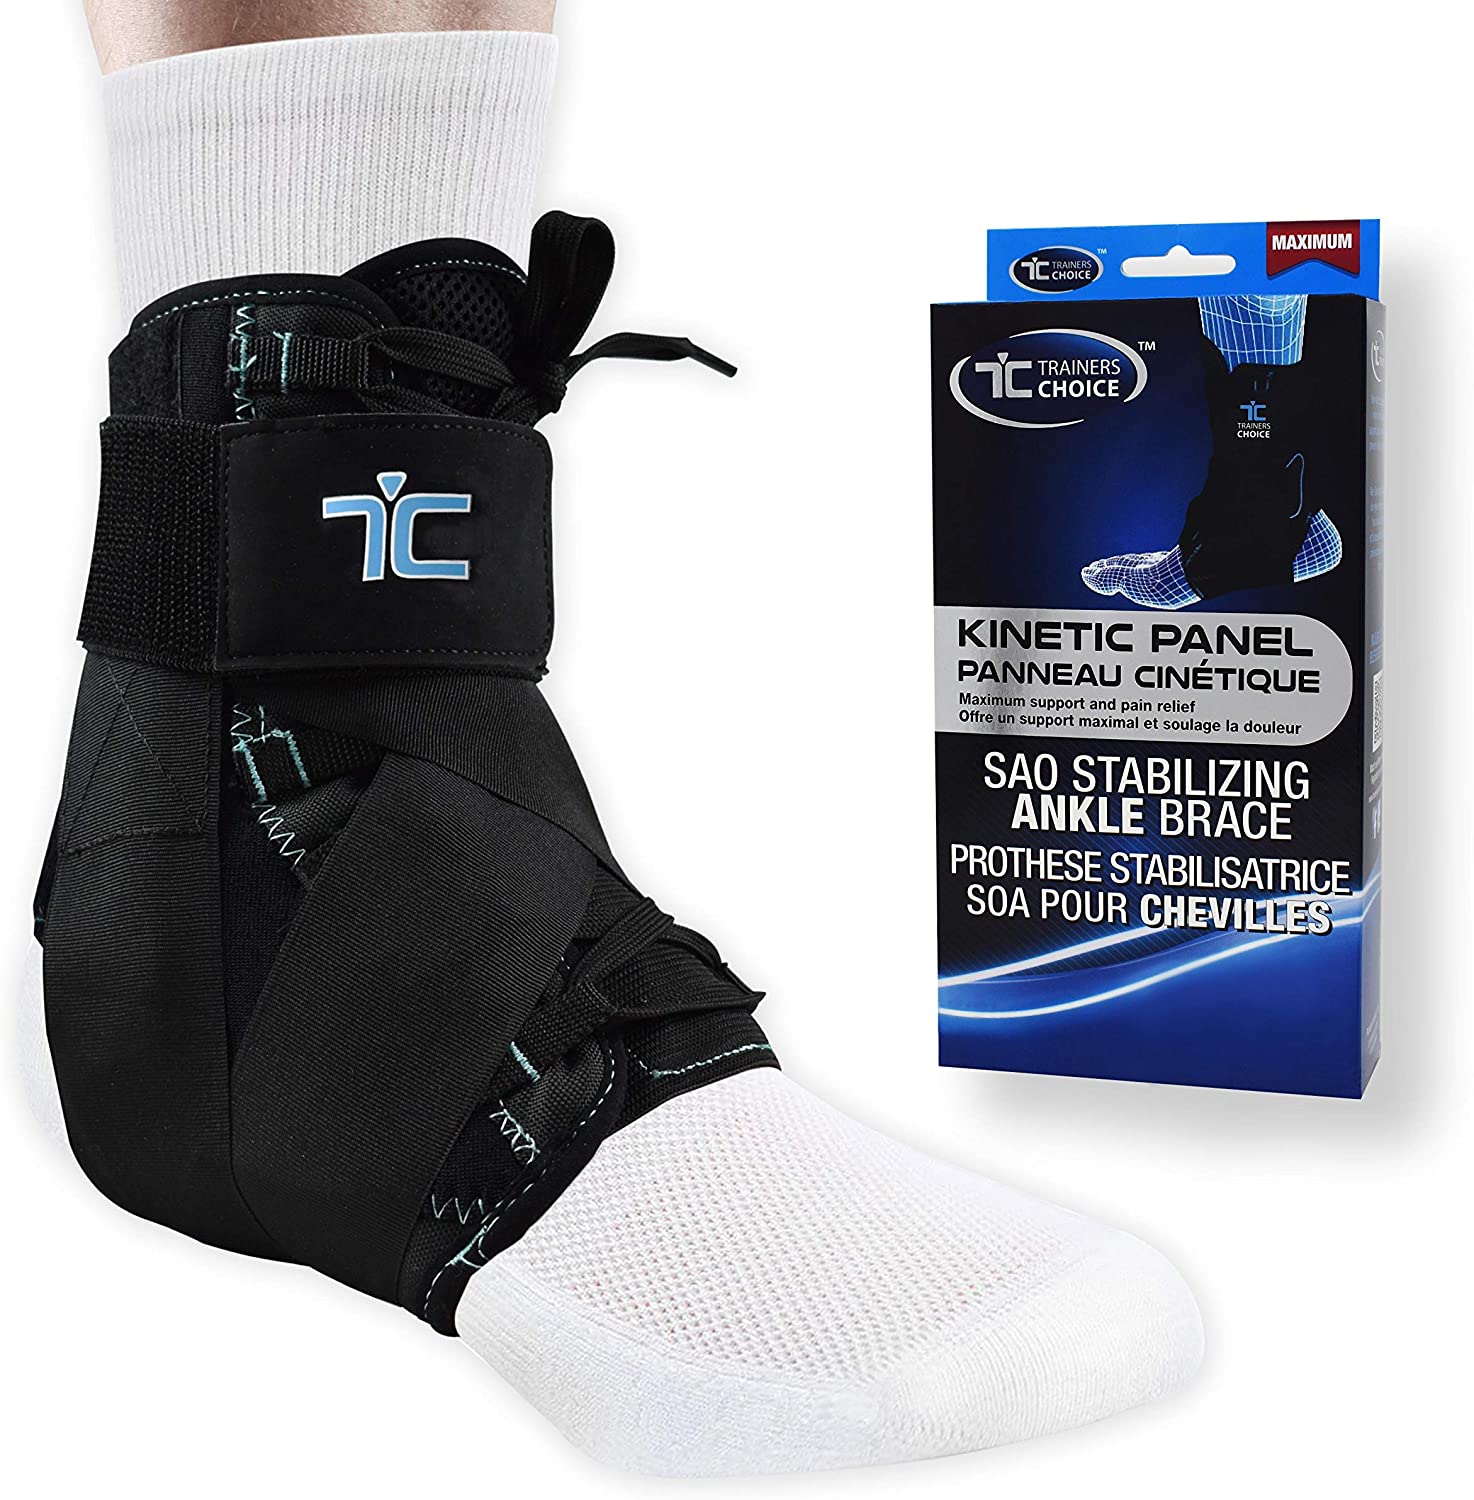 Trainers Choice Stabilizing Ankle Brace M - 1 ea